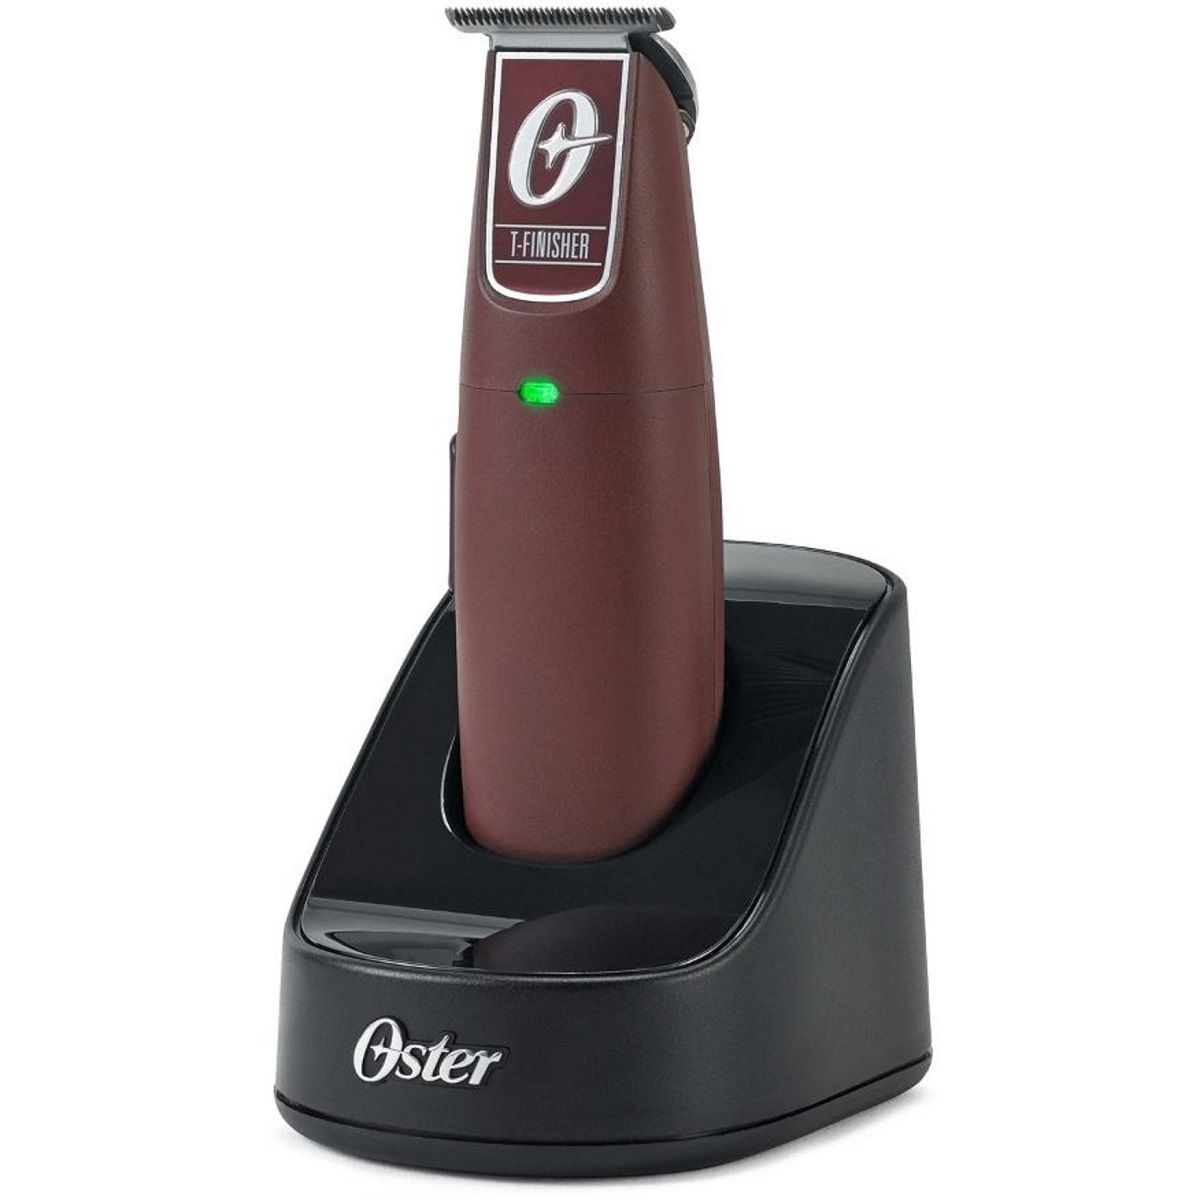 Oster Cordless T-Finisher Trimmer #076059-910-000